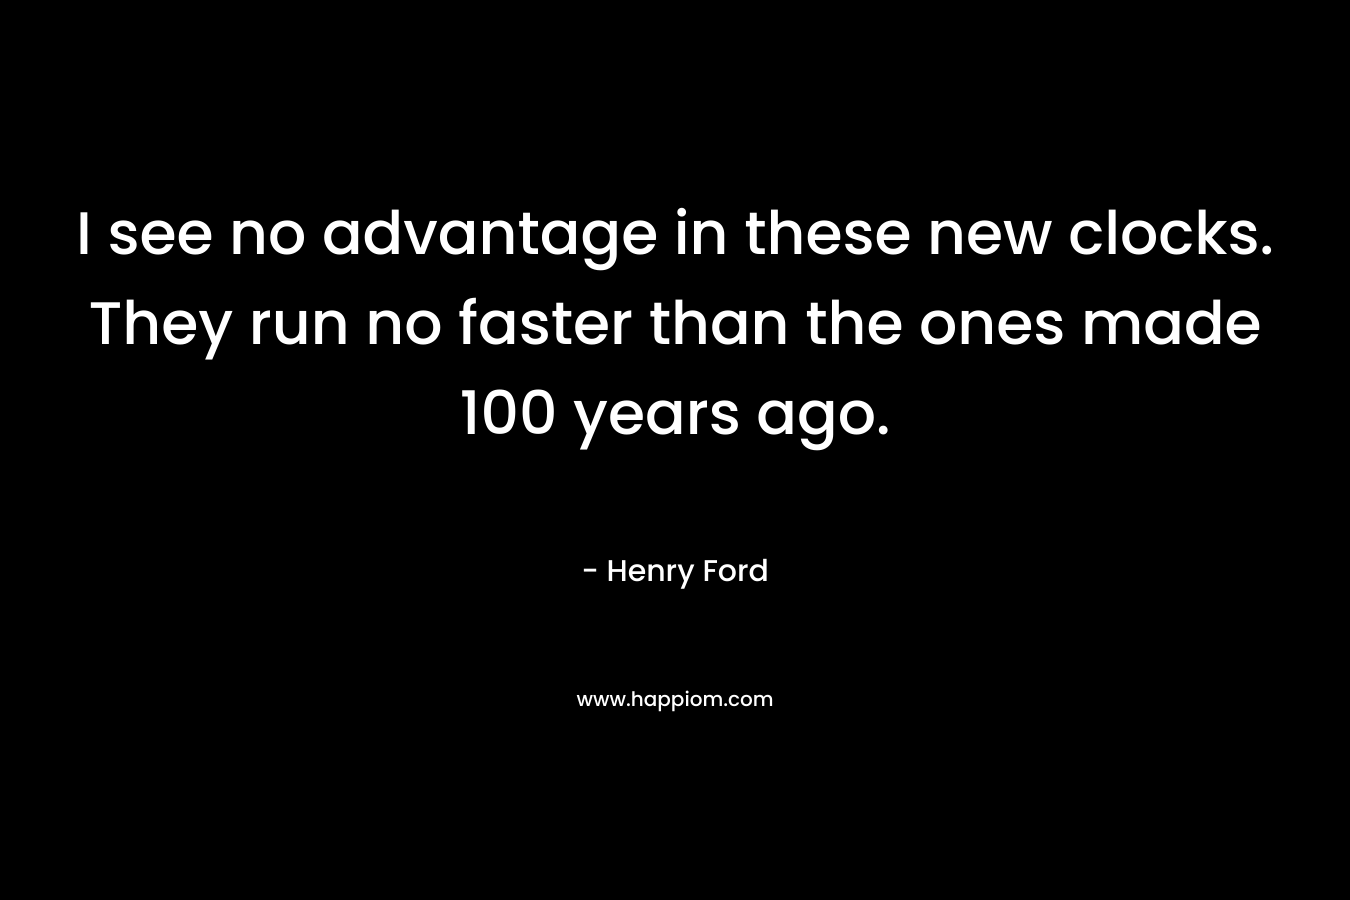 I see no advantage in these new clocks. They run no faster than the ones made 100 years ago. – Henry Ford